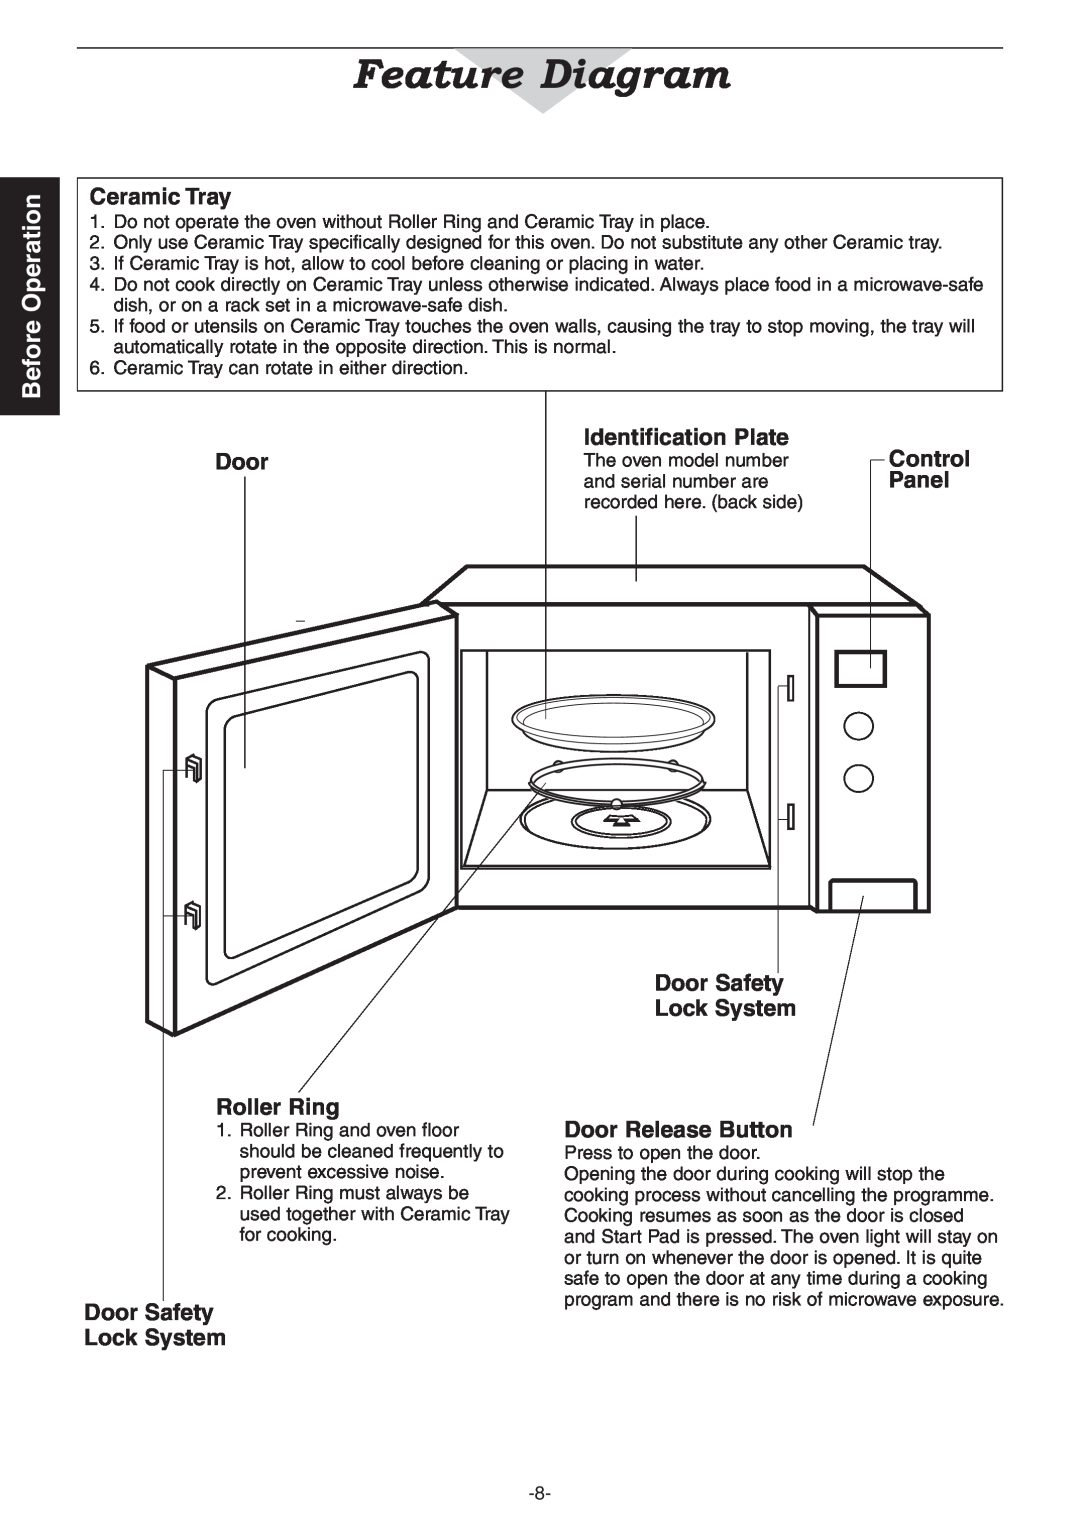 Panasonic NN-CD987W manual Feature Diagram, Before Operation, Ceramic Tray, Door, Identification Plate, Panel, Roller Ring 